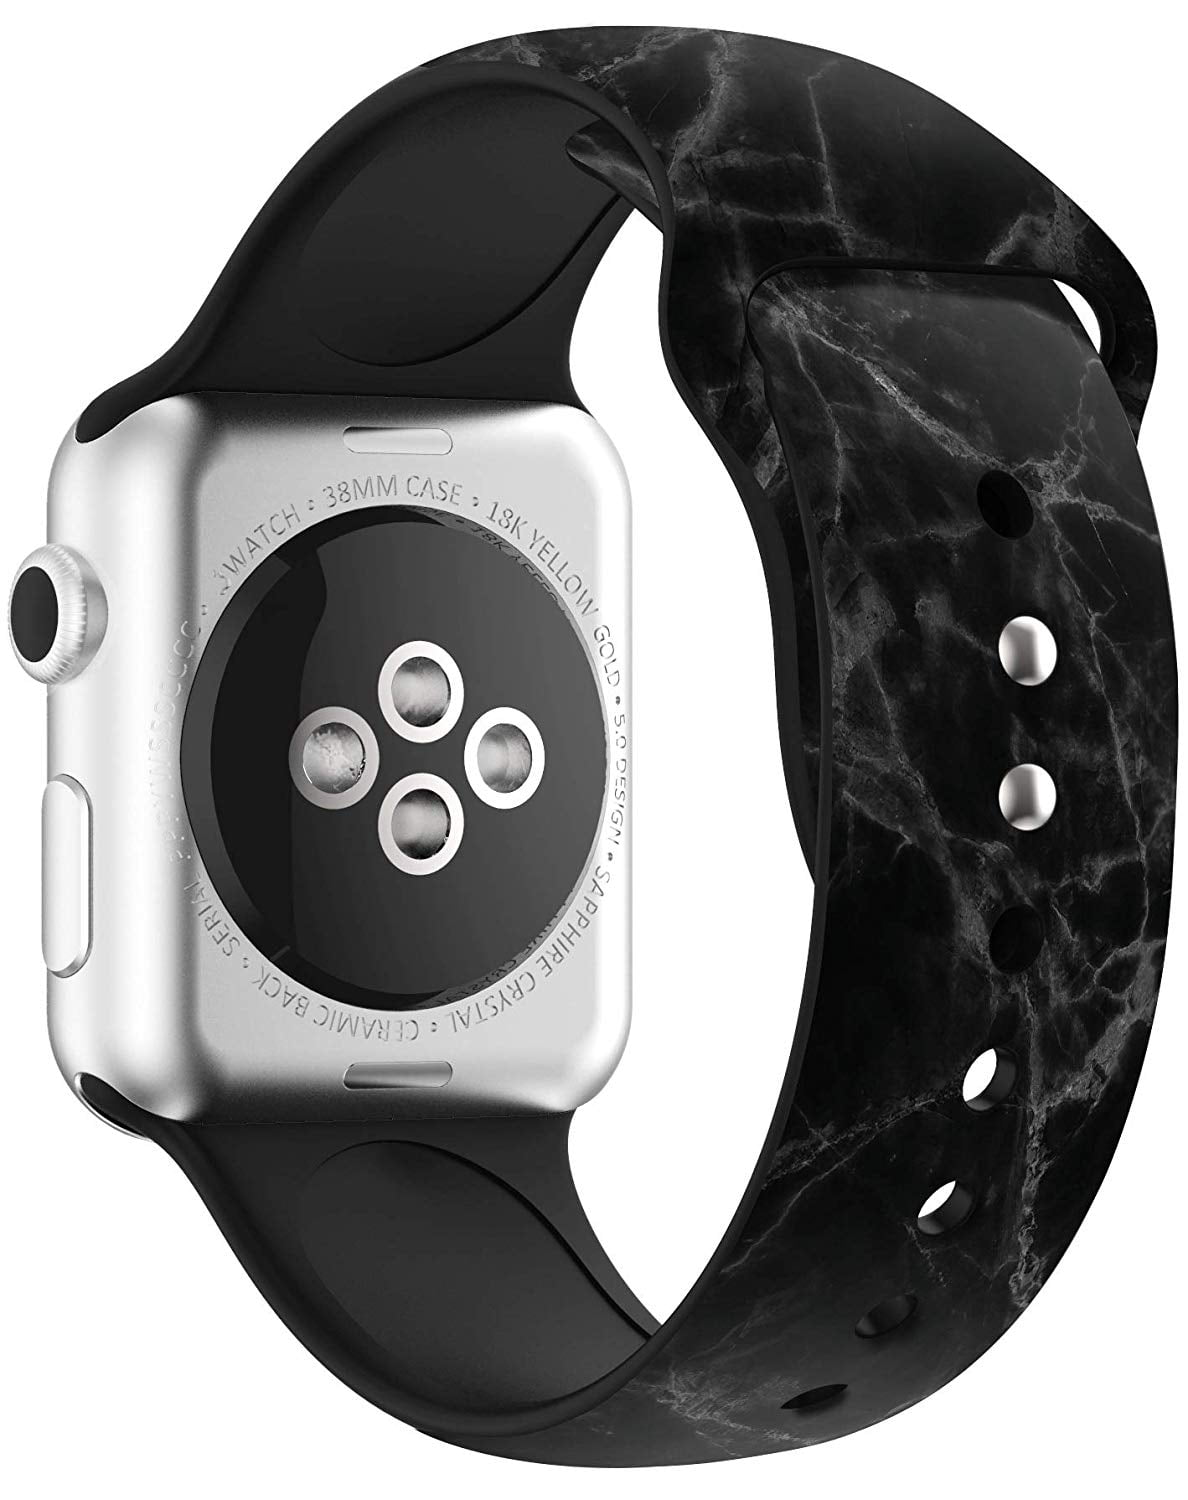 SPYCASE Apple Watch Bands 42/44mm, Silicone Wristband for iWatch Series  1/2/3/4/5/SE/6/SE/Nike+ - Black Marble